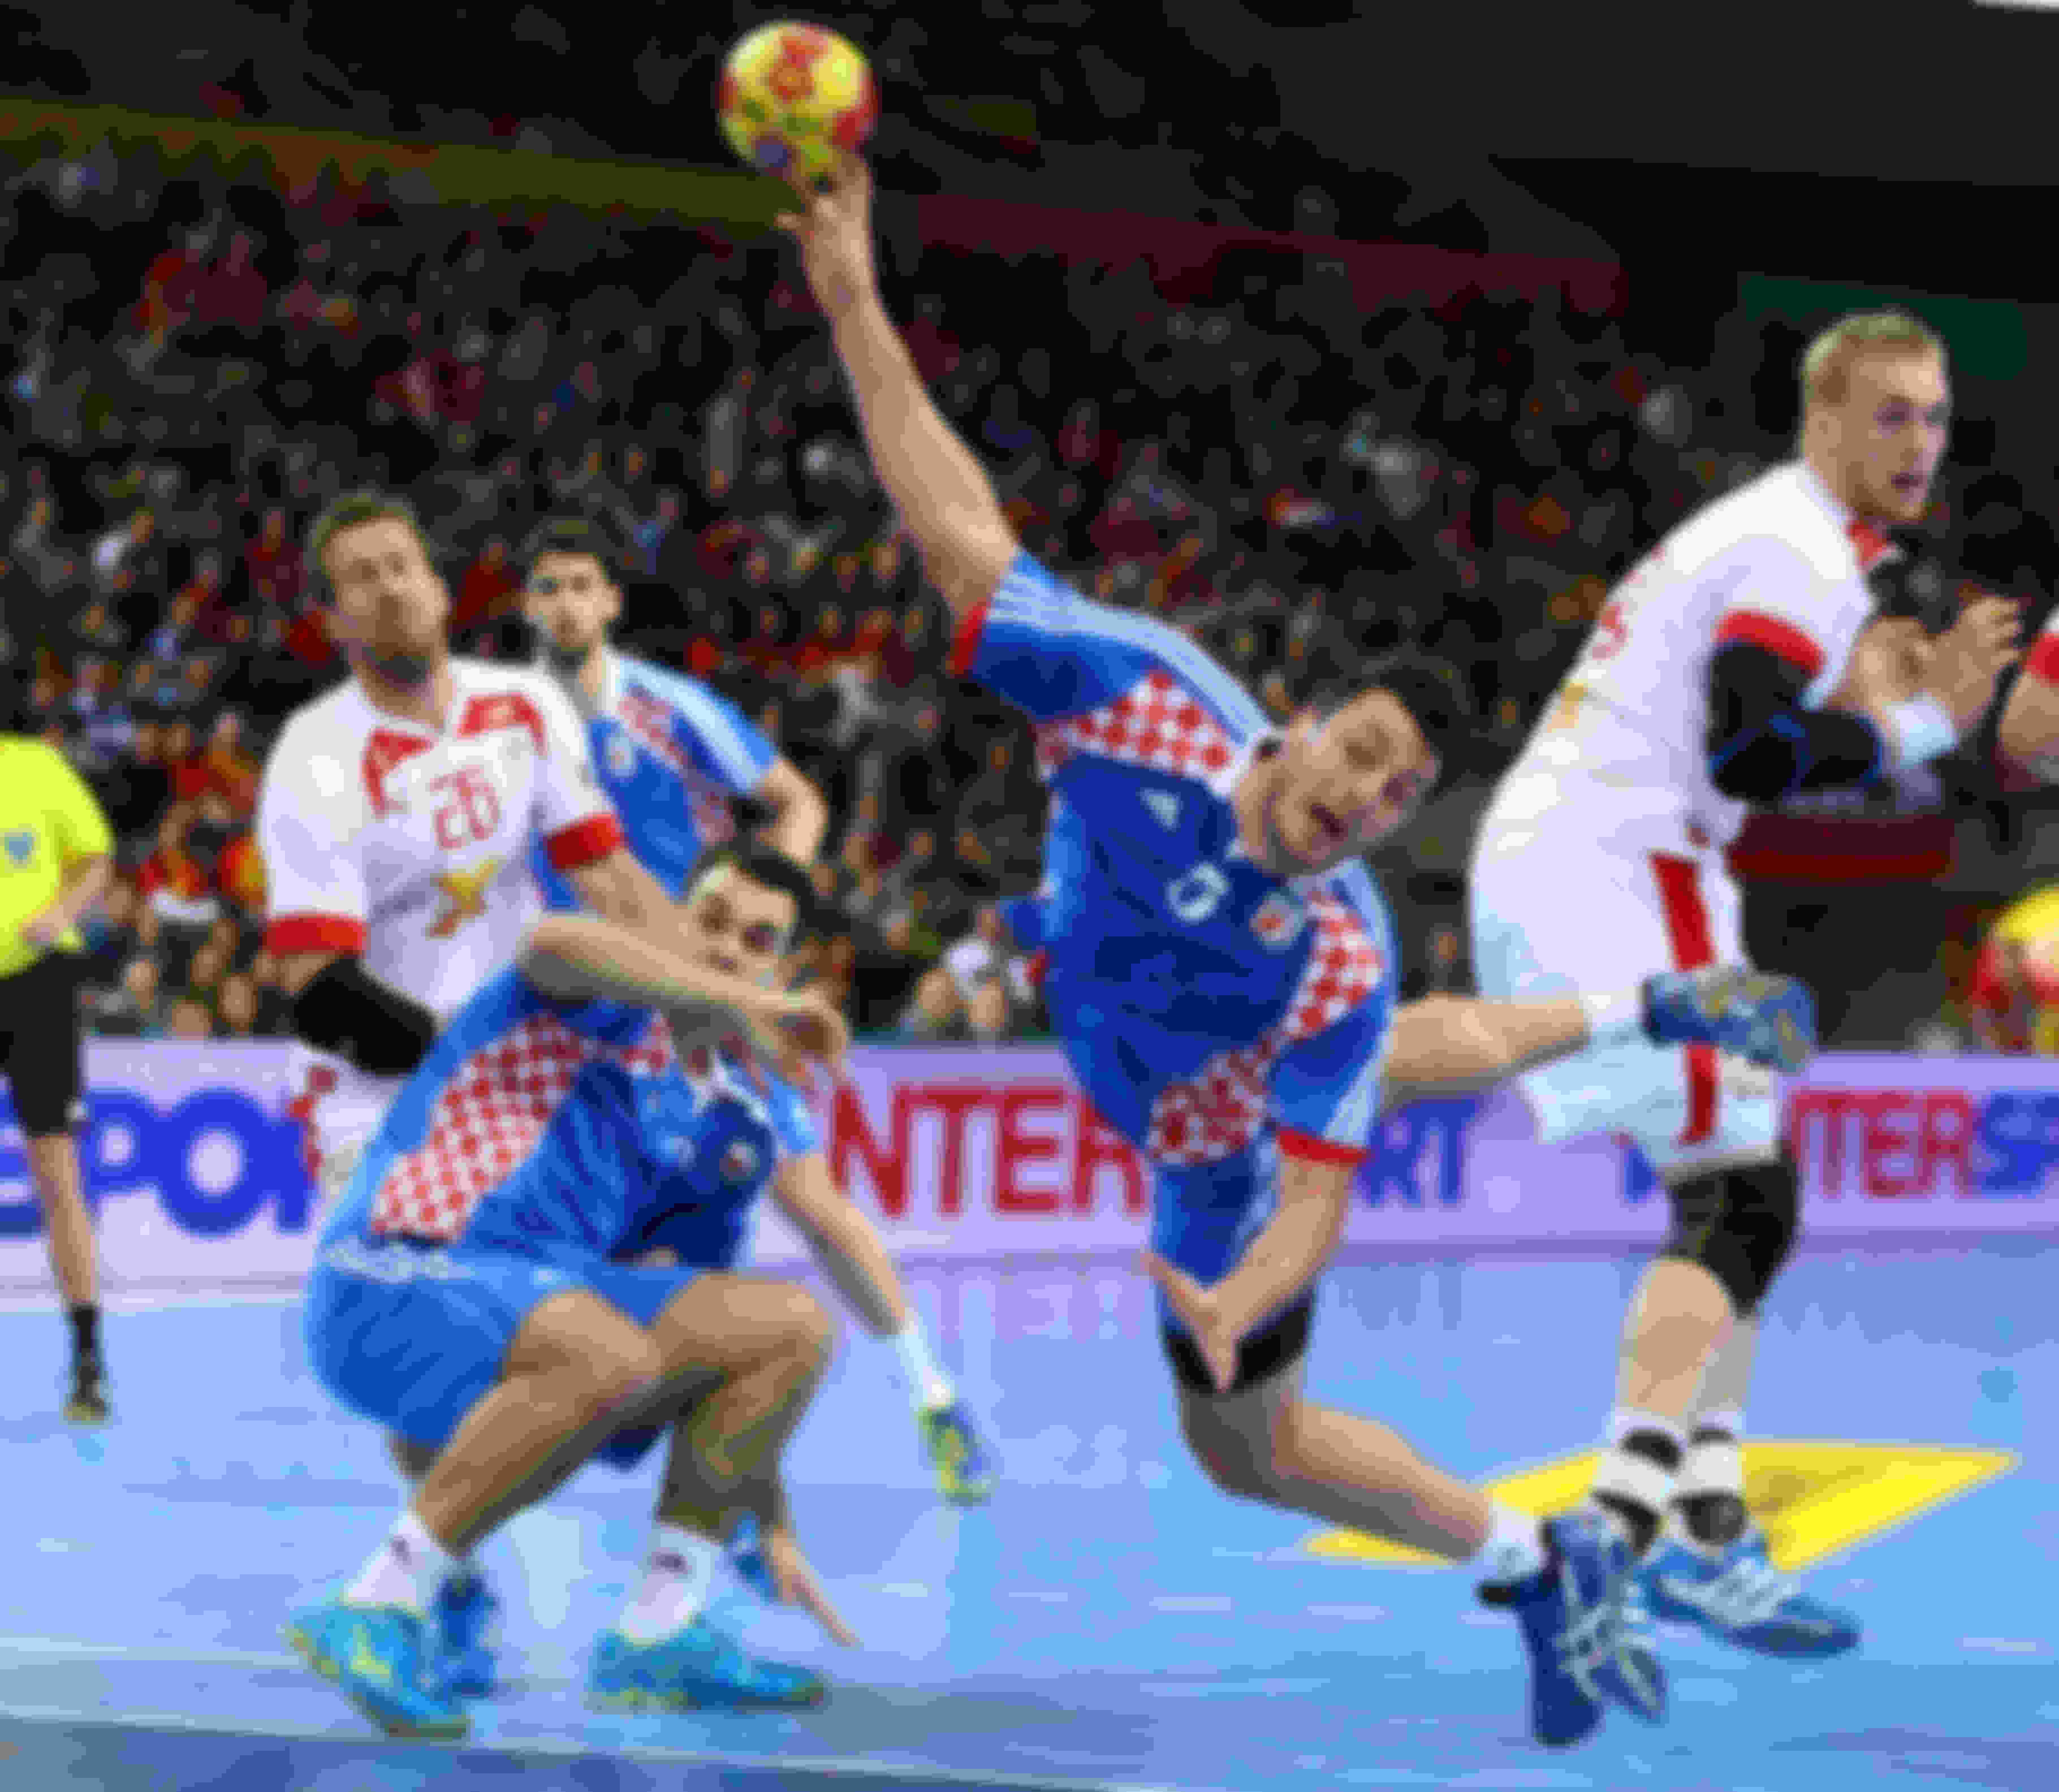 Duvnjak scoring against Denmark in the 2013 World Championship semi final in Barcelona. Croatia finished the tournament 3rd. (Photo by Christof Koepsel/Bongarts/Getty Images)